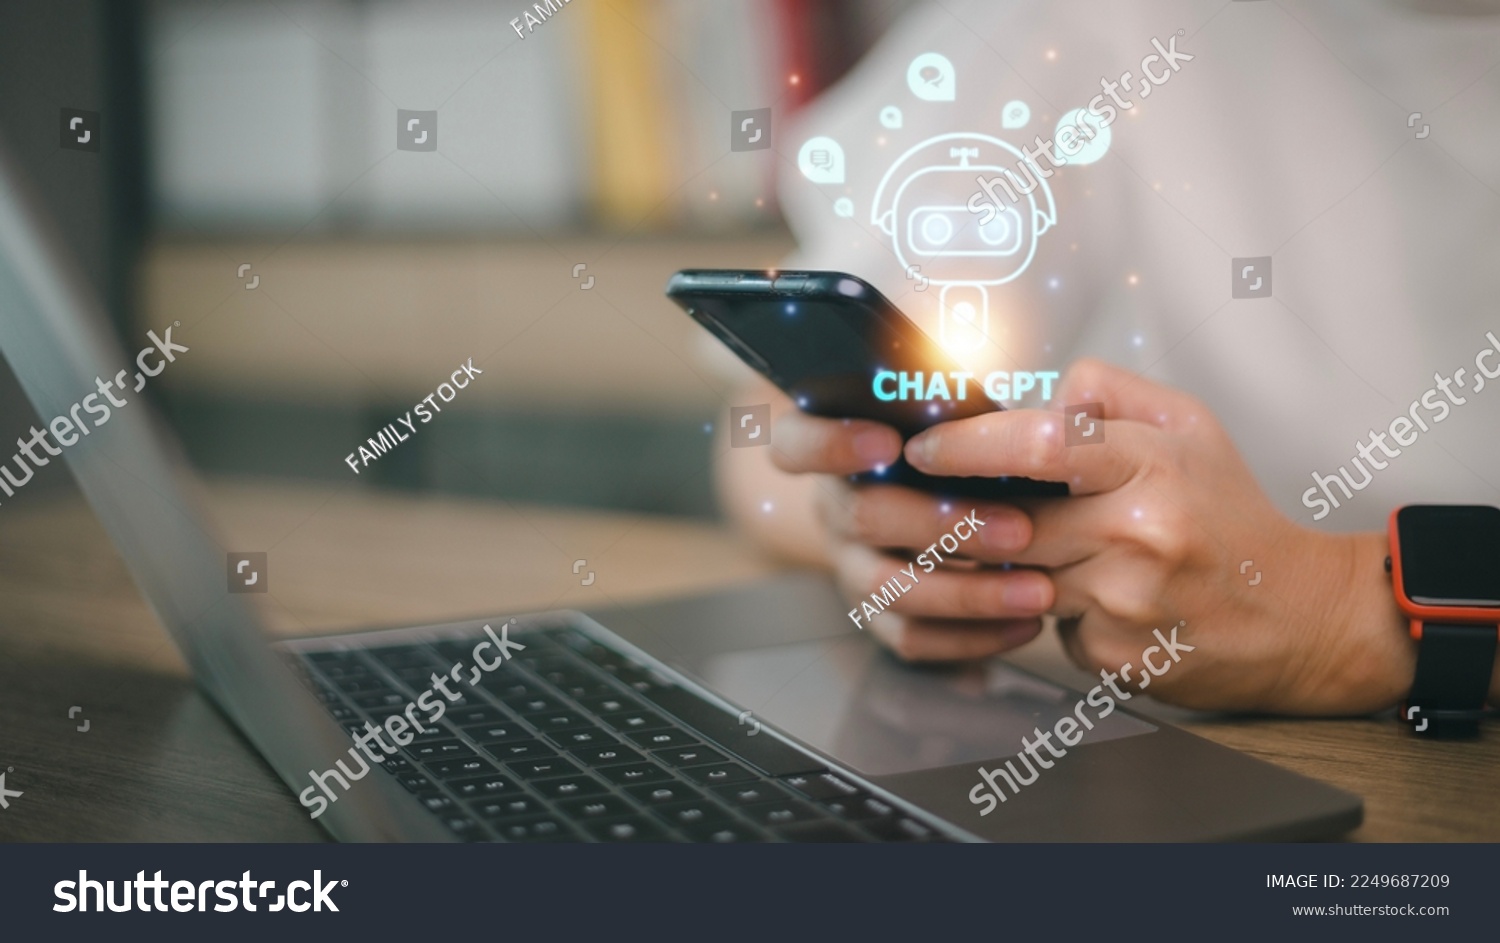 Digital chatbot, chat GPT, robot application, conversation assistant, AI Artificial Intelligence concept. Man using mobile smart phone, with digital chatbot on virtual screen #2249687209